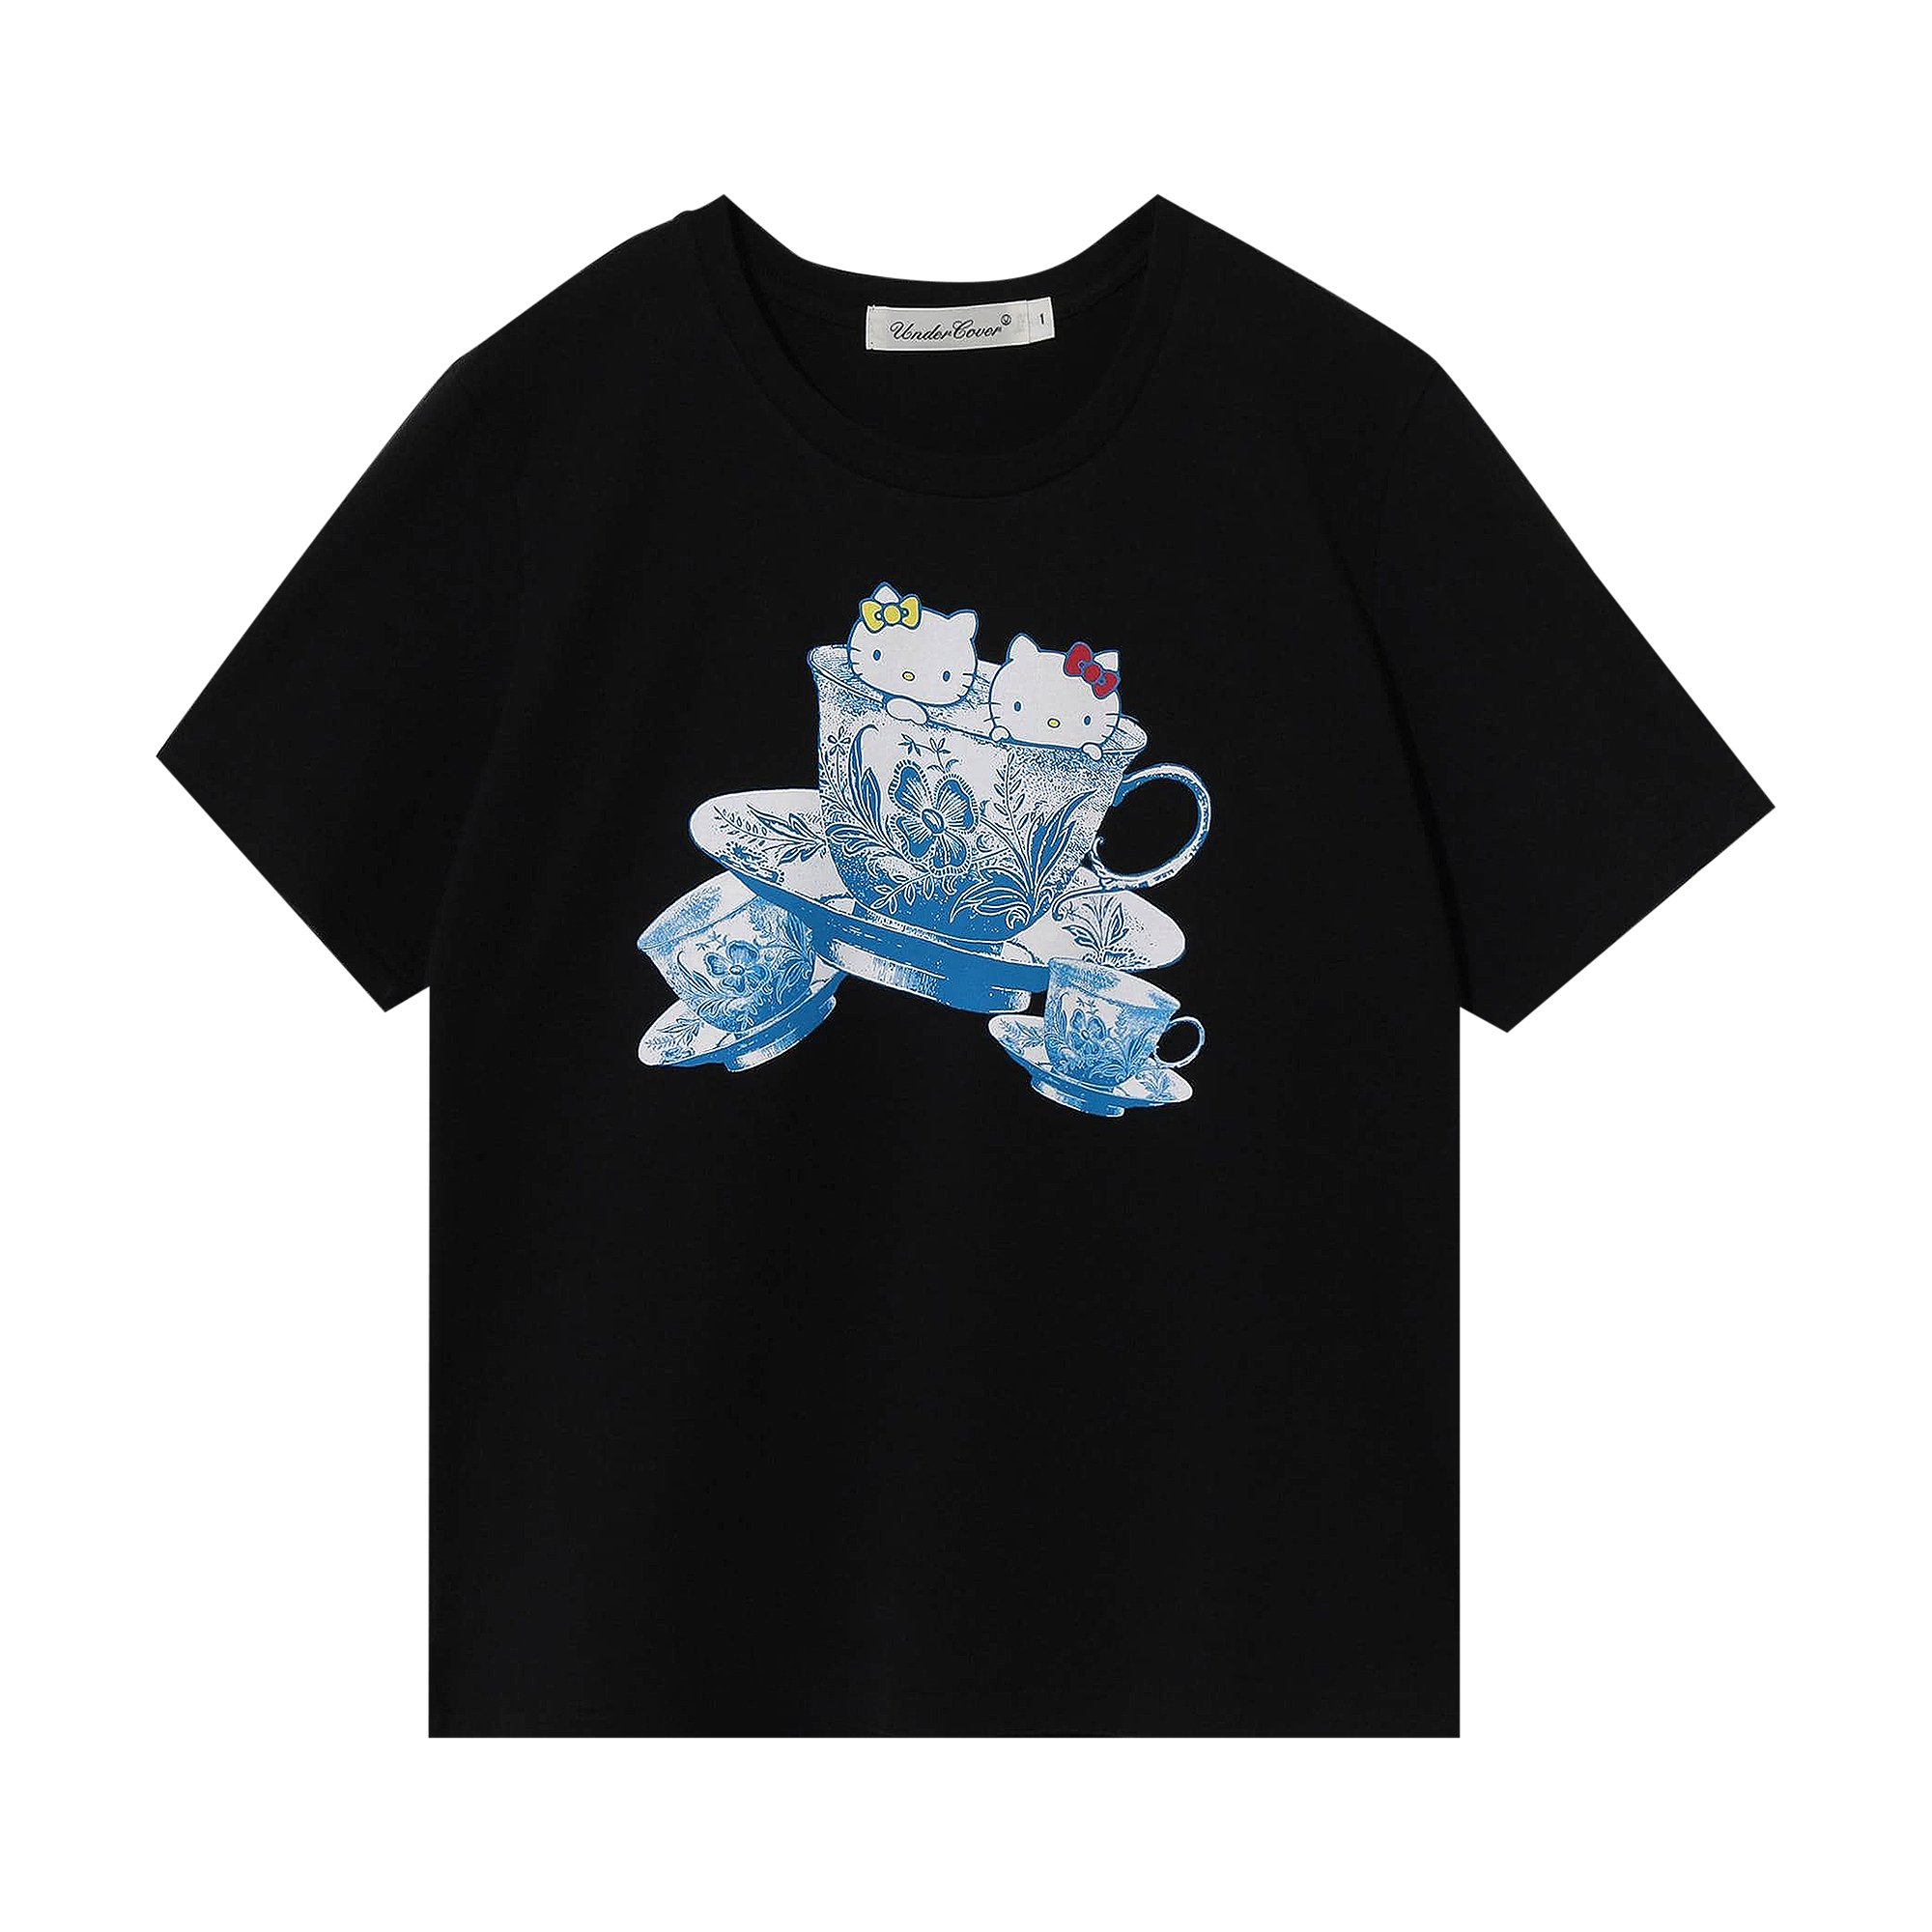 Buy Undercover x Hello Kitty Tee 'Black' - UC1A2807 BLAC | GOAT